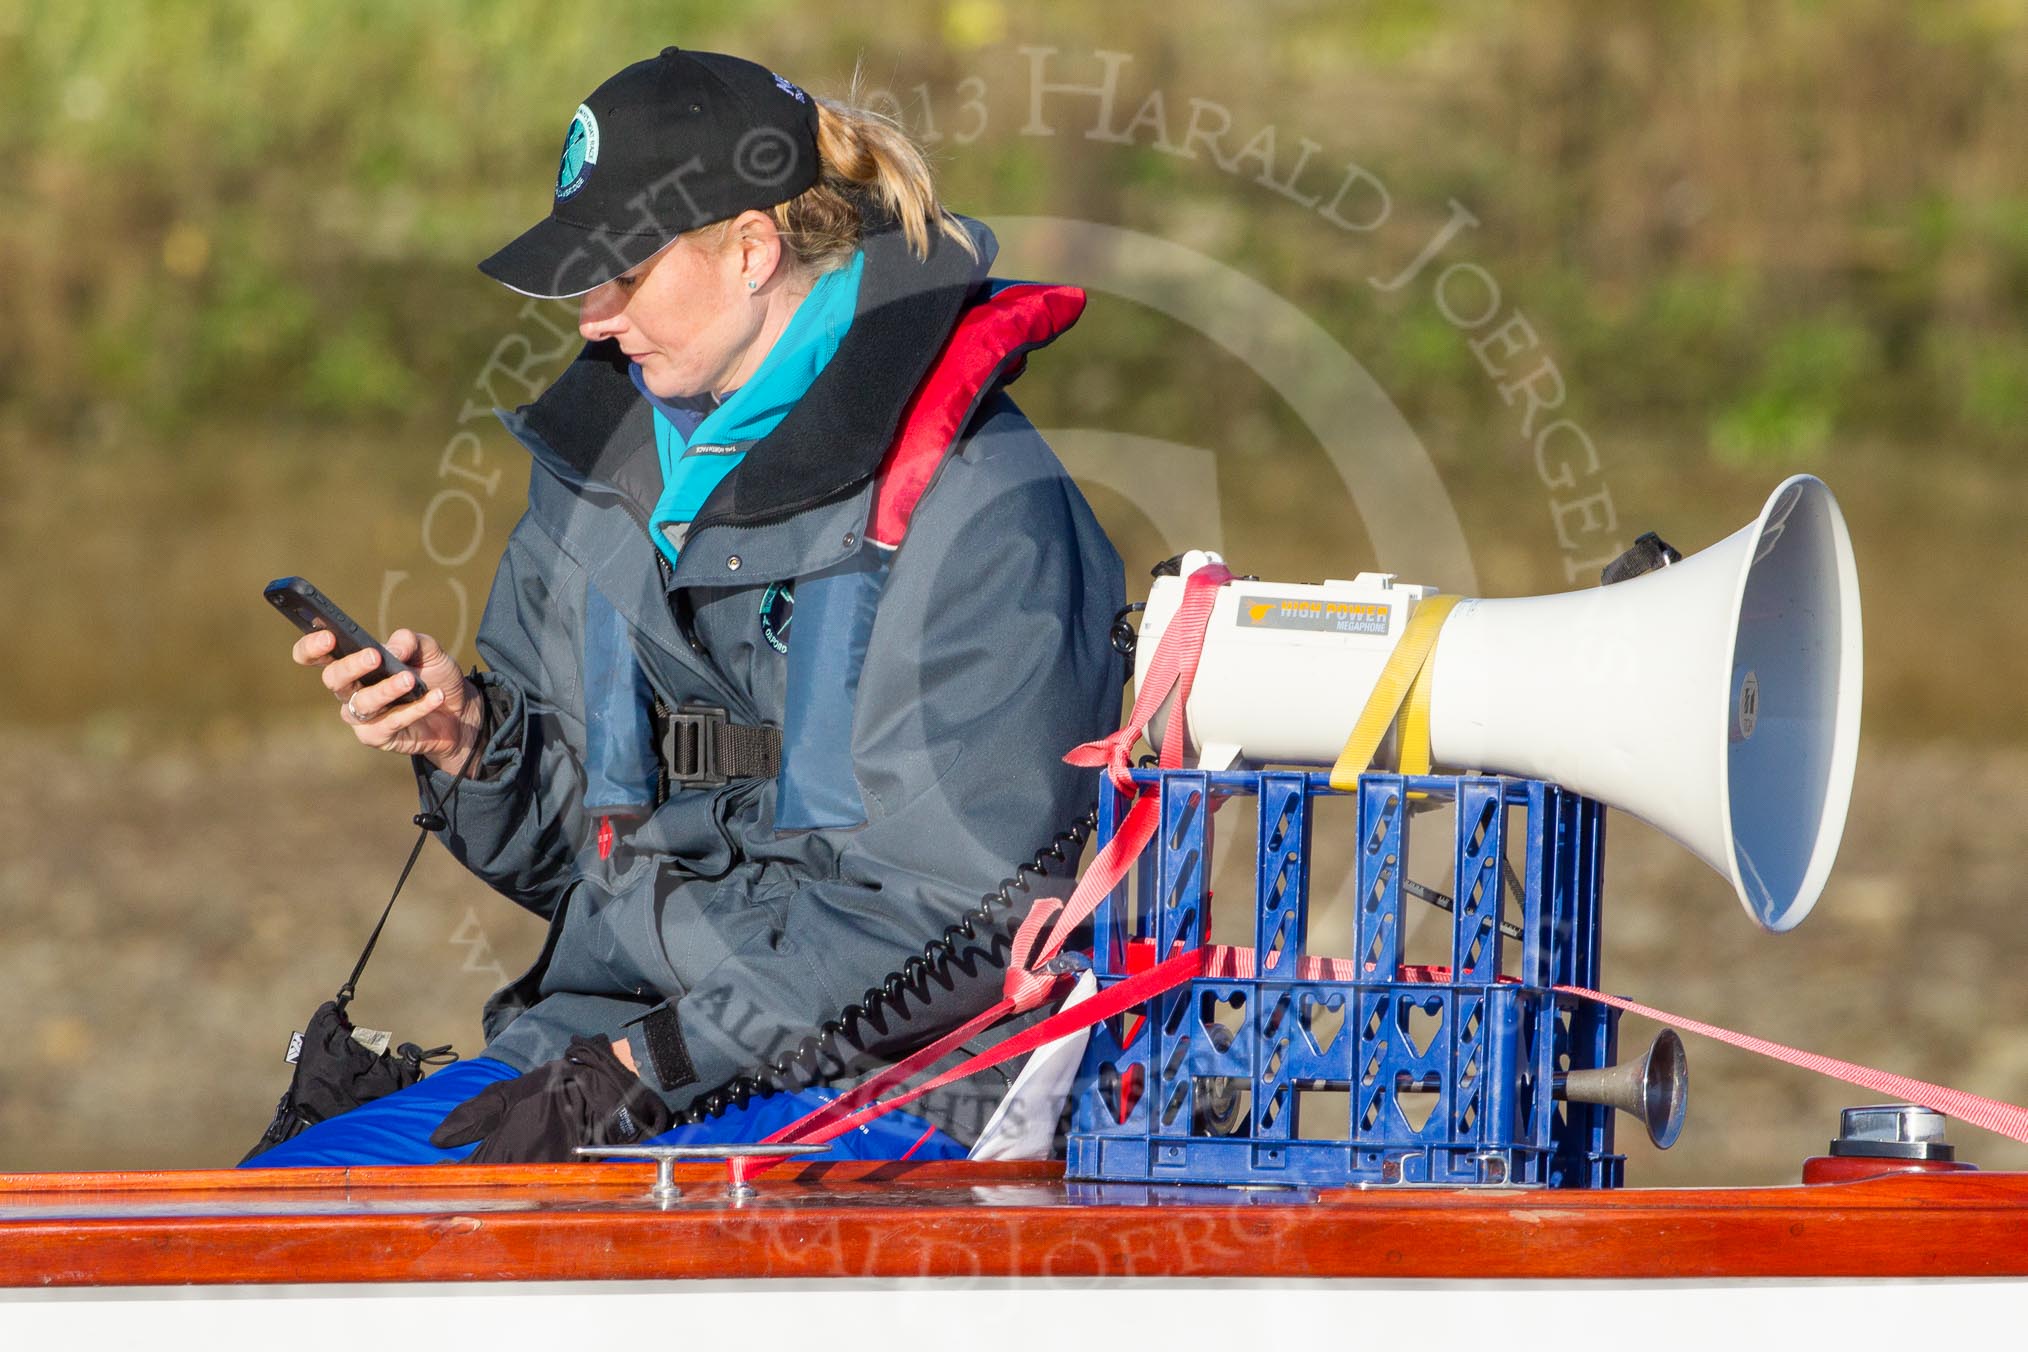 The Boat Race season 2014 - Women's Trial VIIIs (OUWBC, Oxford): Trial race umpire Sarah Winckless..
River Thames between Putney Bridge and Mortlake,
London SW15,

United Kingdom,
on 19 December 2013 at 12:34, image #30